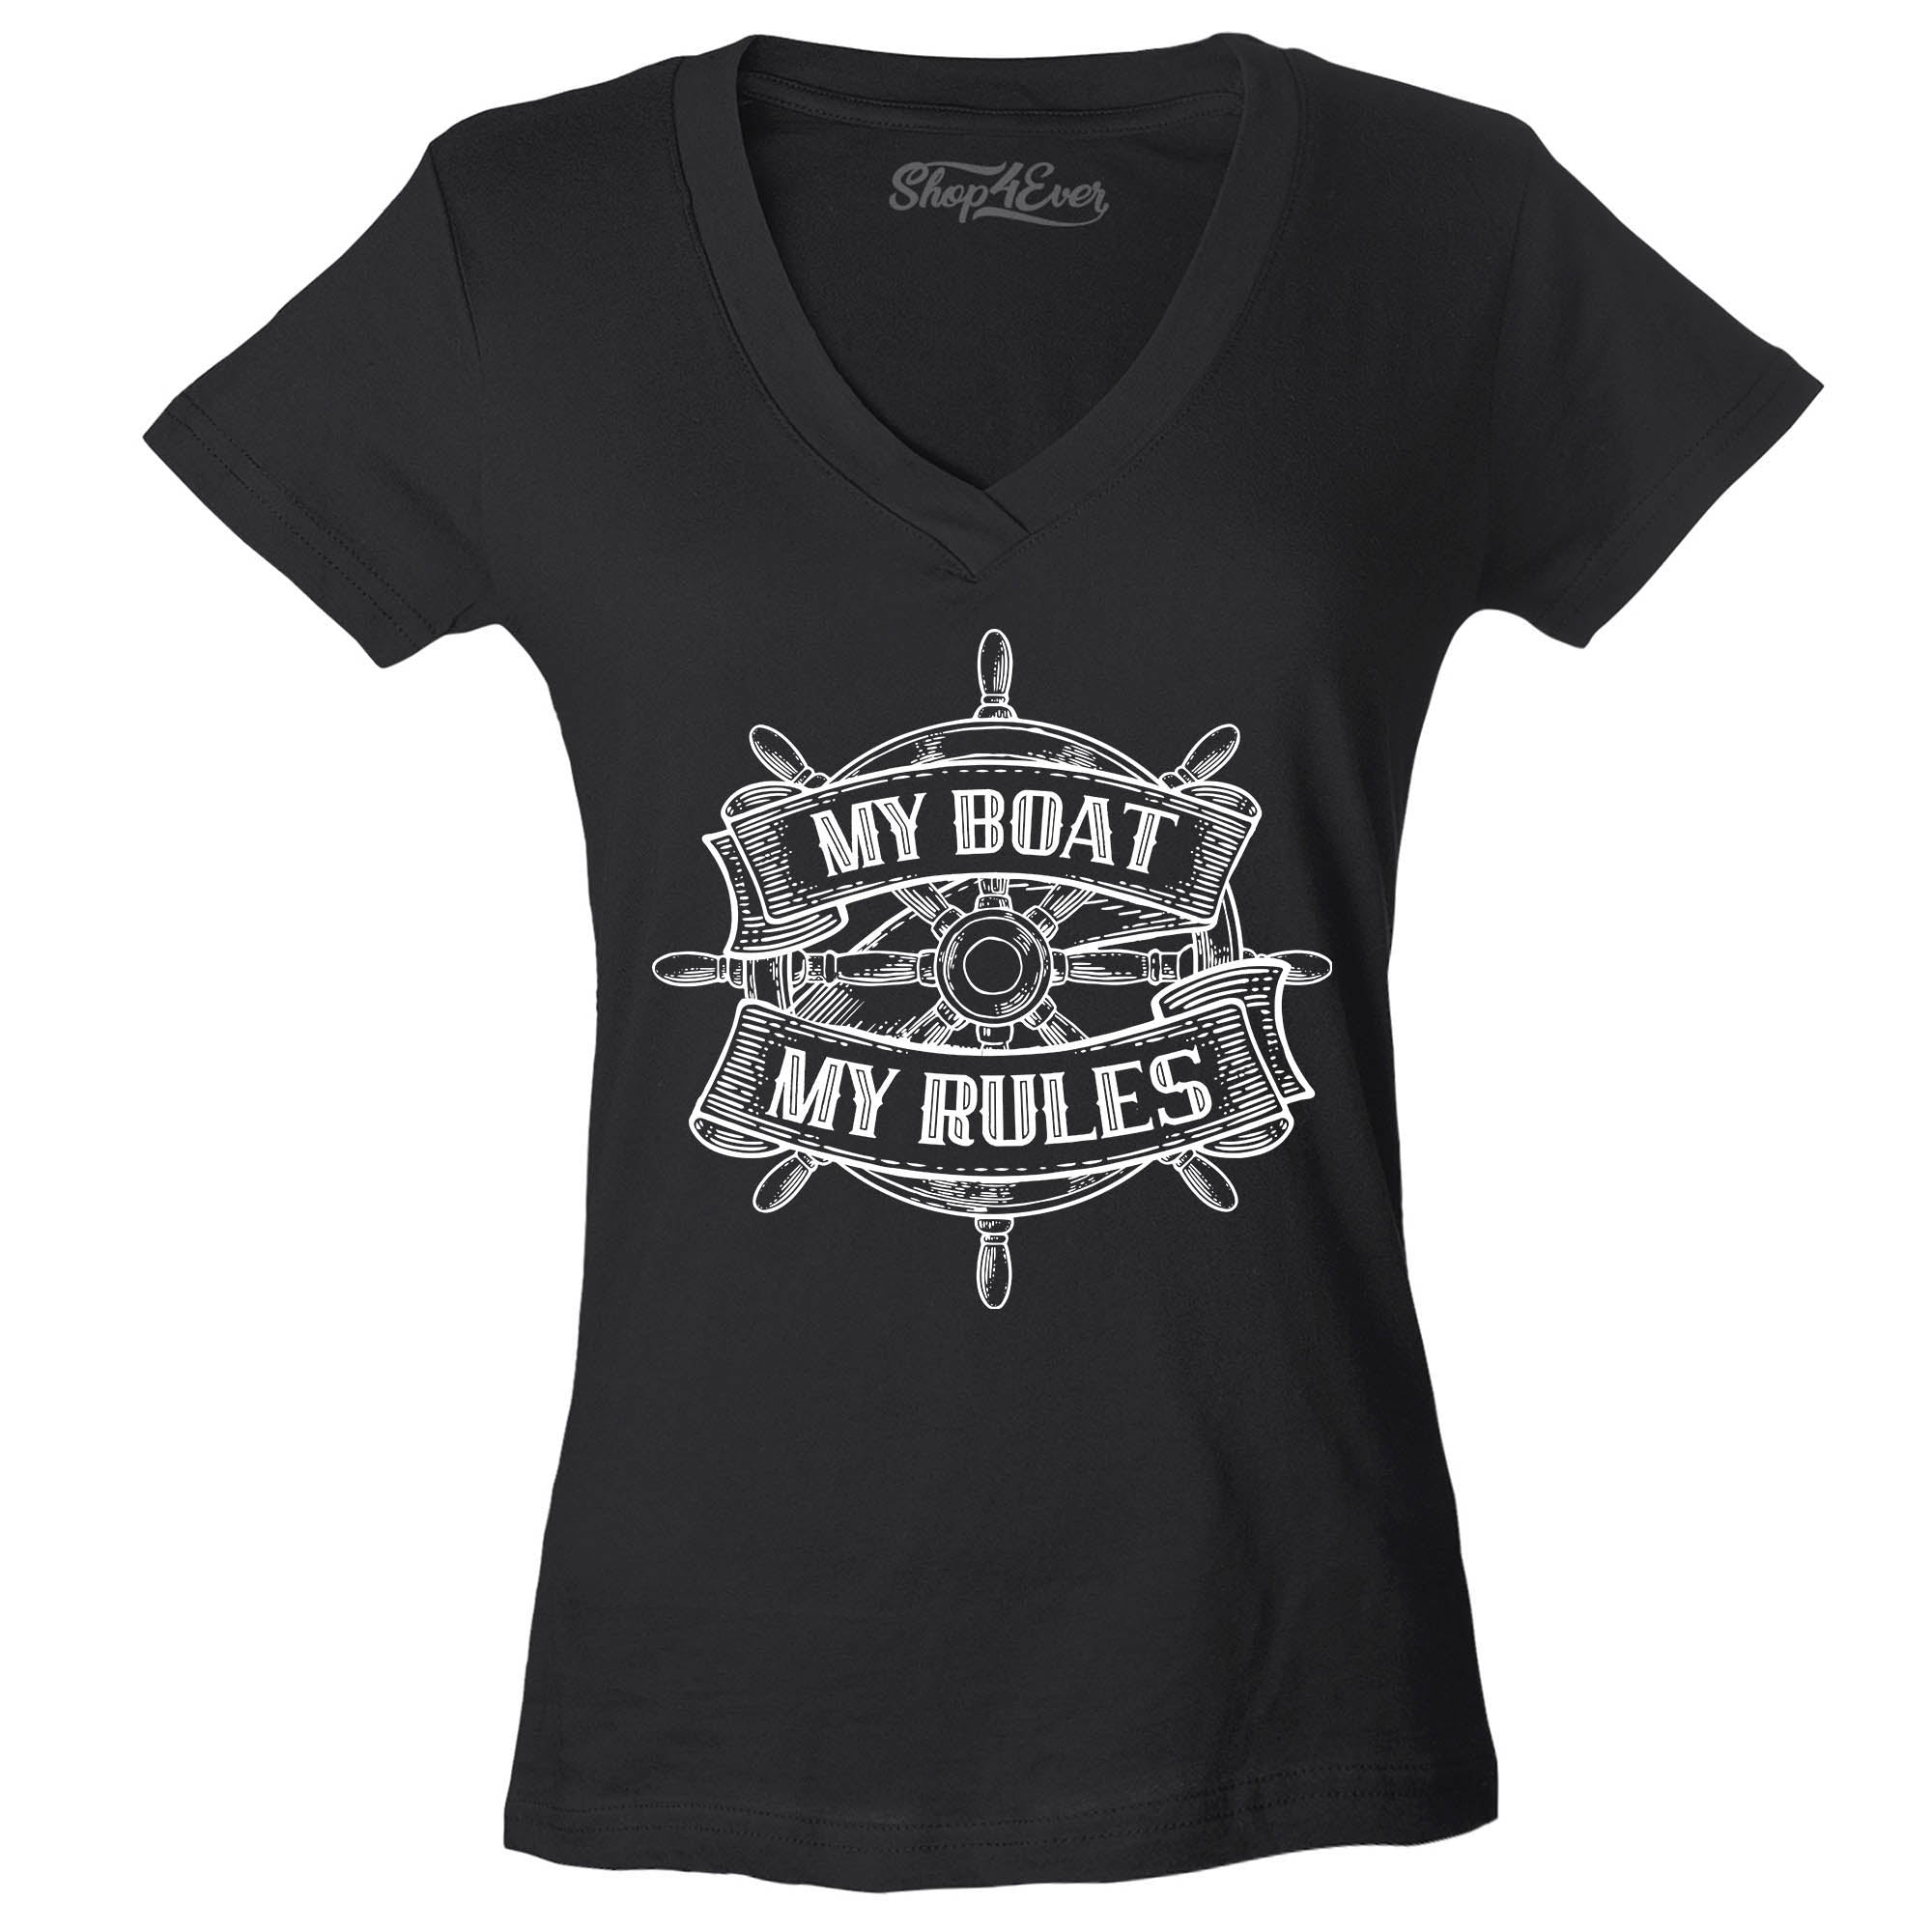 My Boat My Rules Women's V-Neck T-Shirt Slim Fit